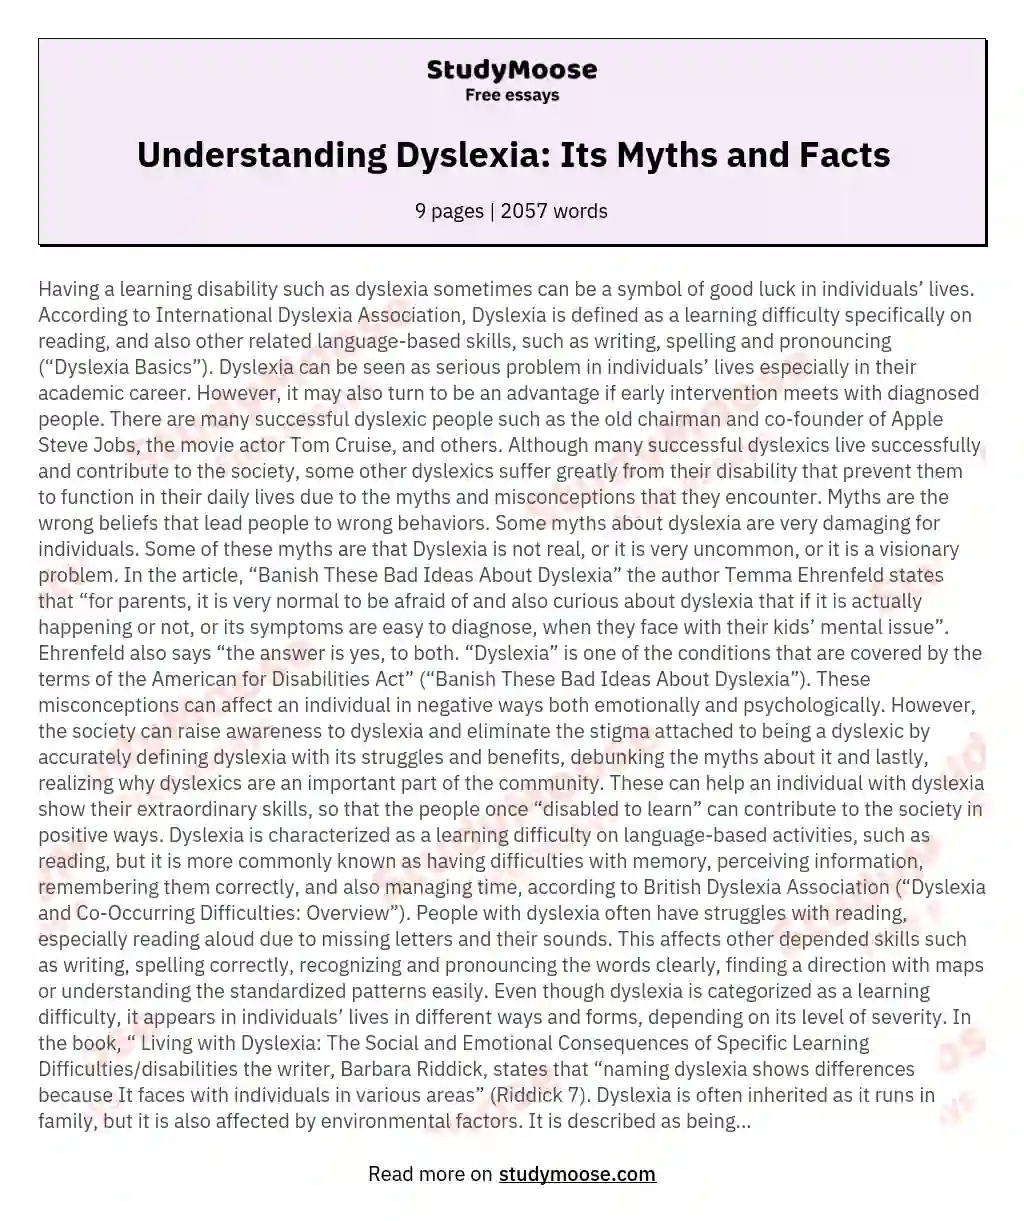 Understanding Dyslexia: Its Myths and Facts